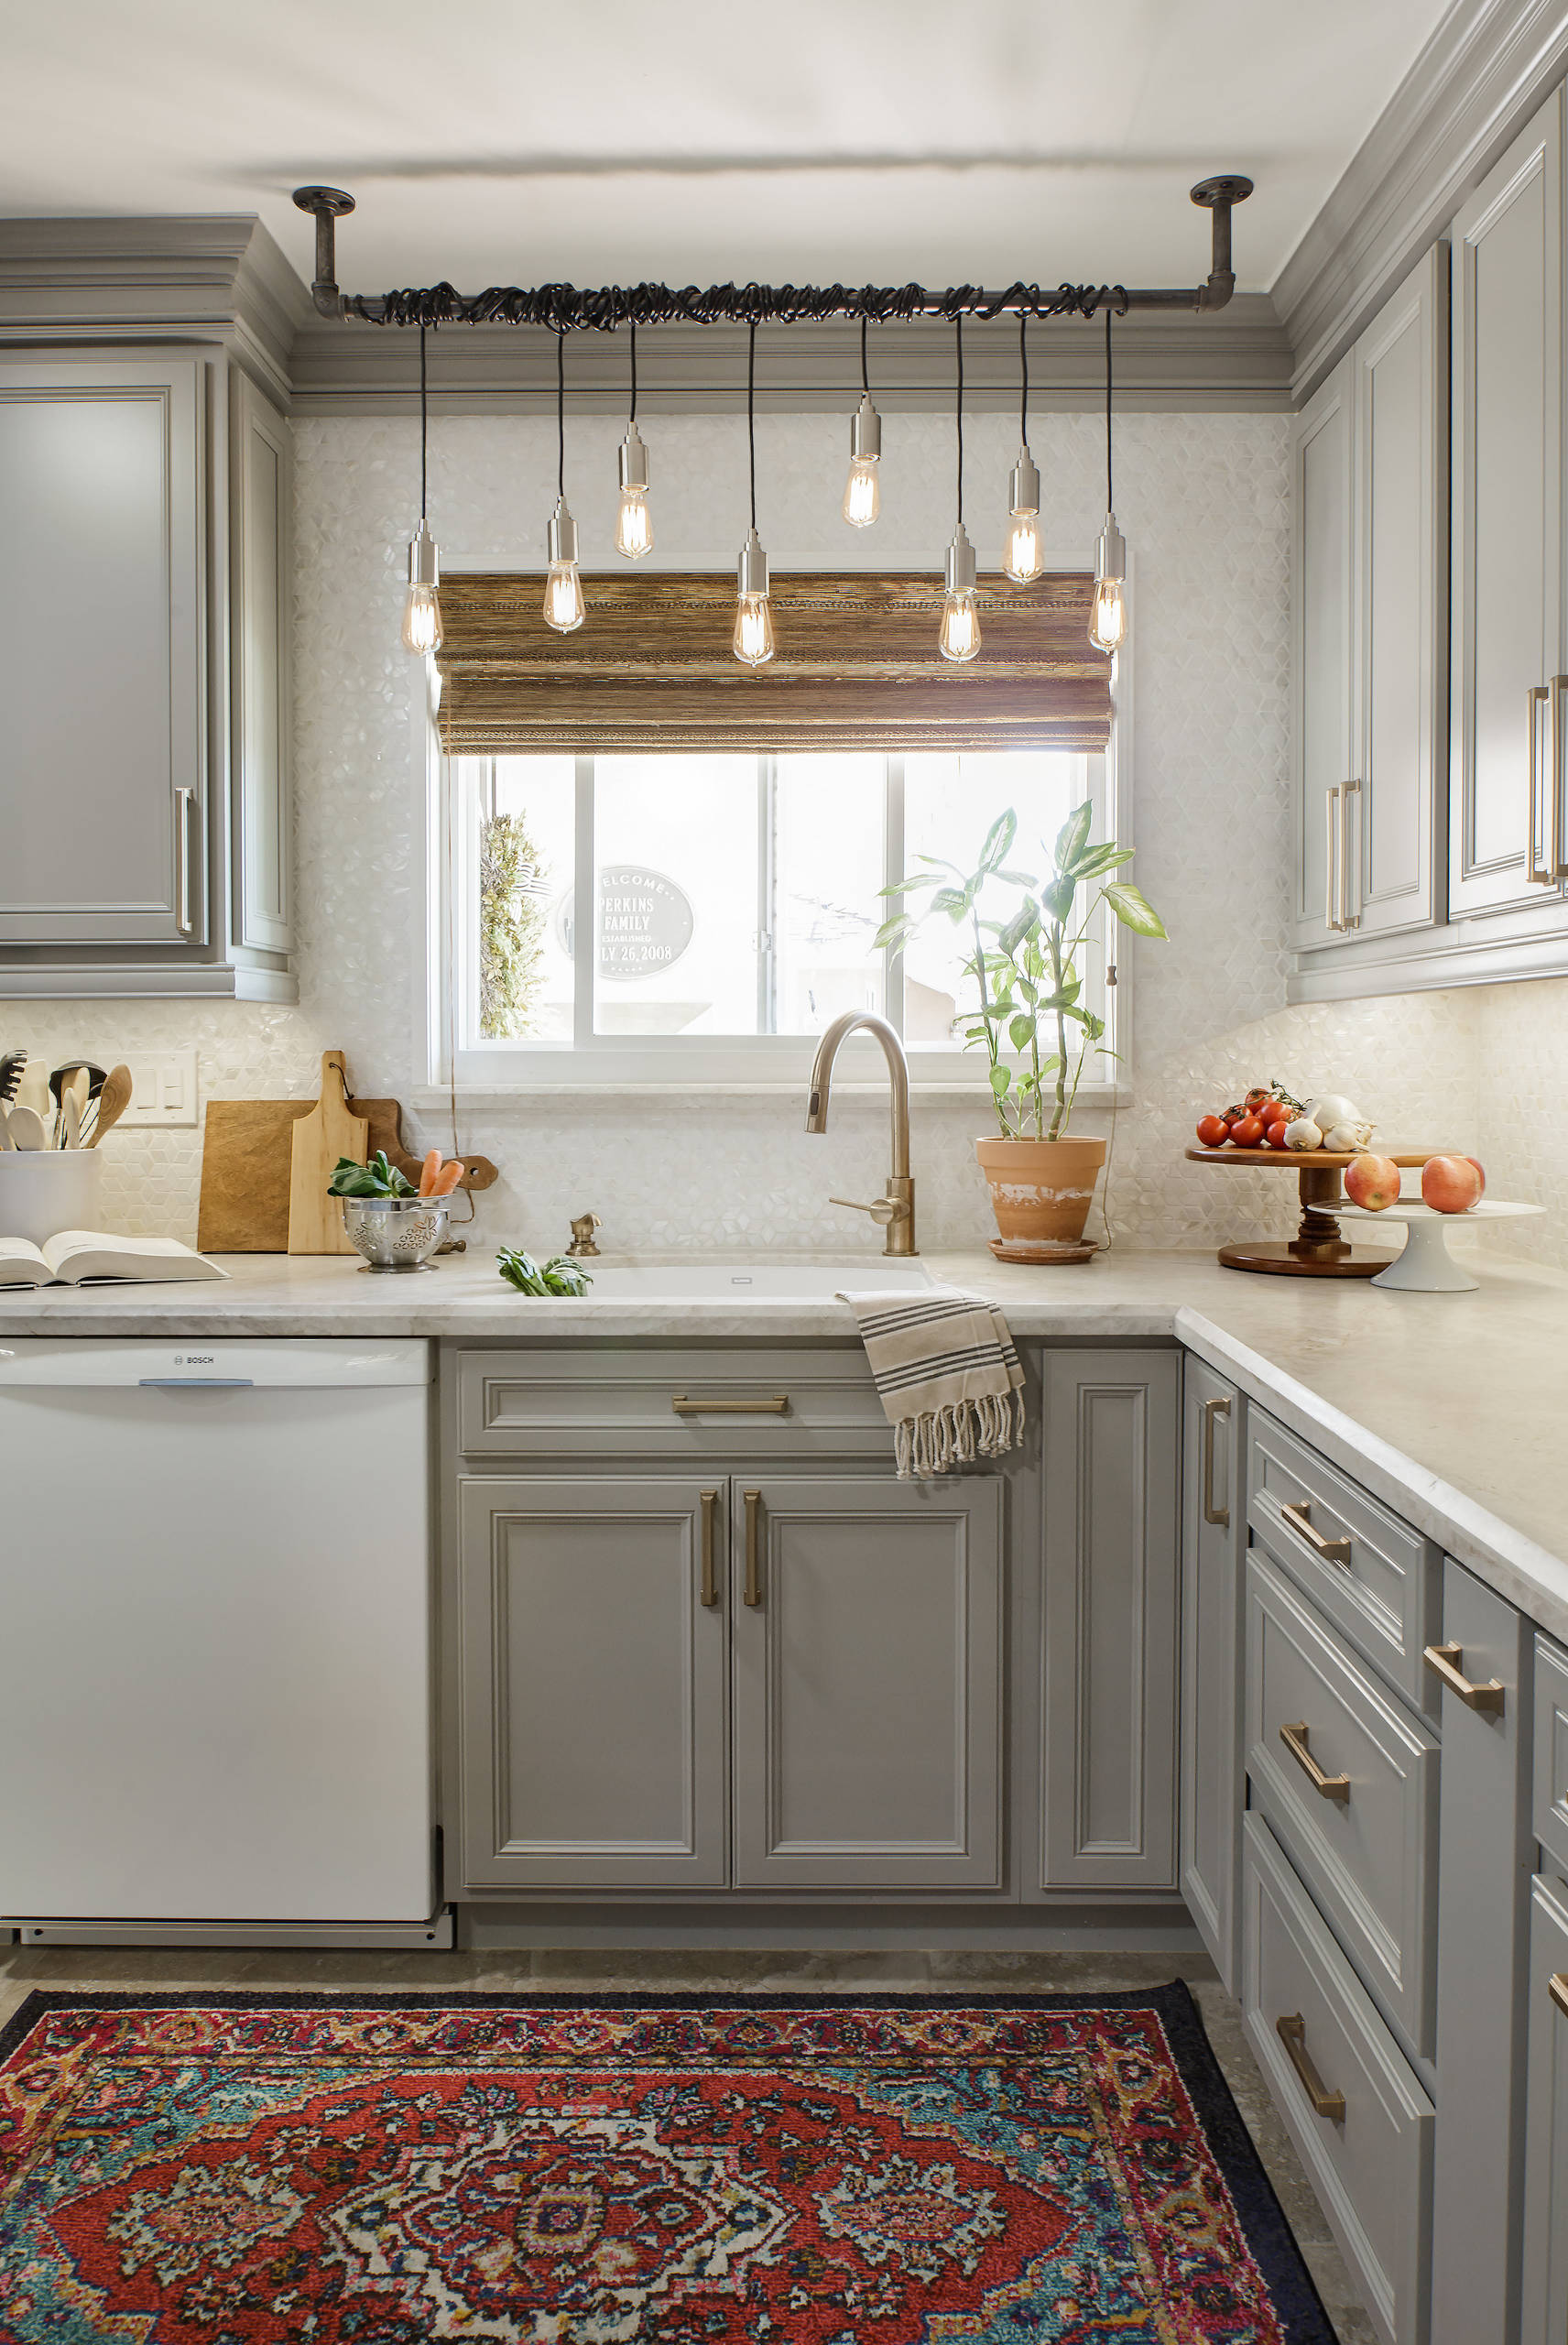 https://st.hzcdn.com/simgs/pictures/kitchens/gray-cabinets-brighten-this-small-light-and-white-transitional-family-kitchen-danielle-interior-design-and-decor-img~3c51594e06da29d5_14-1315-1-7204f60.jpg